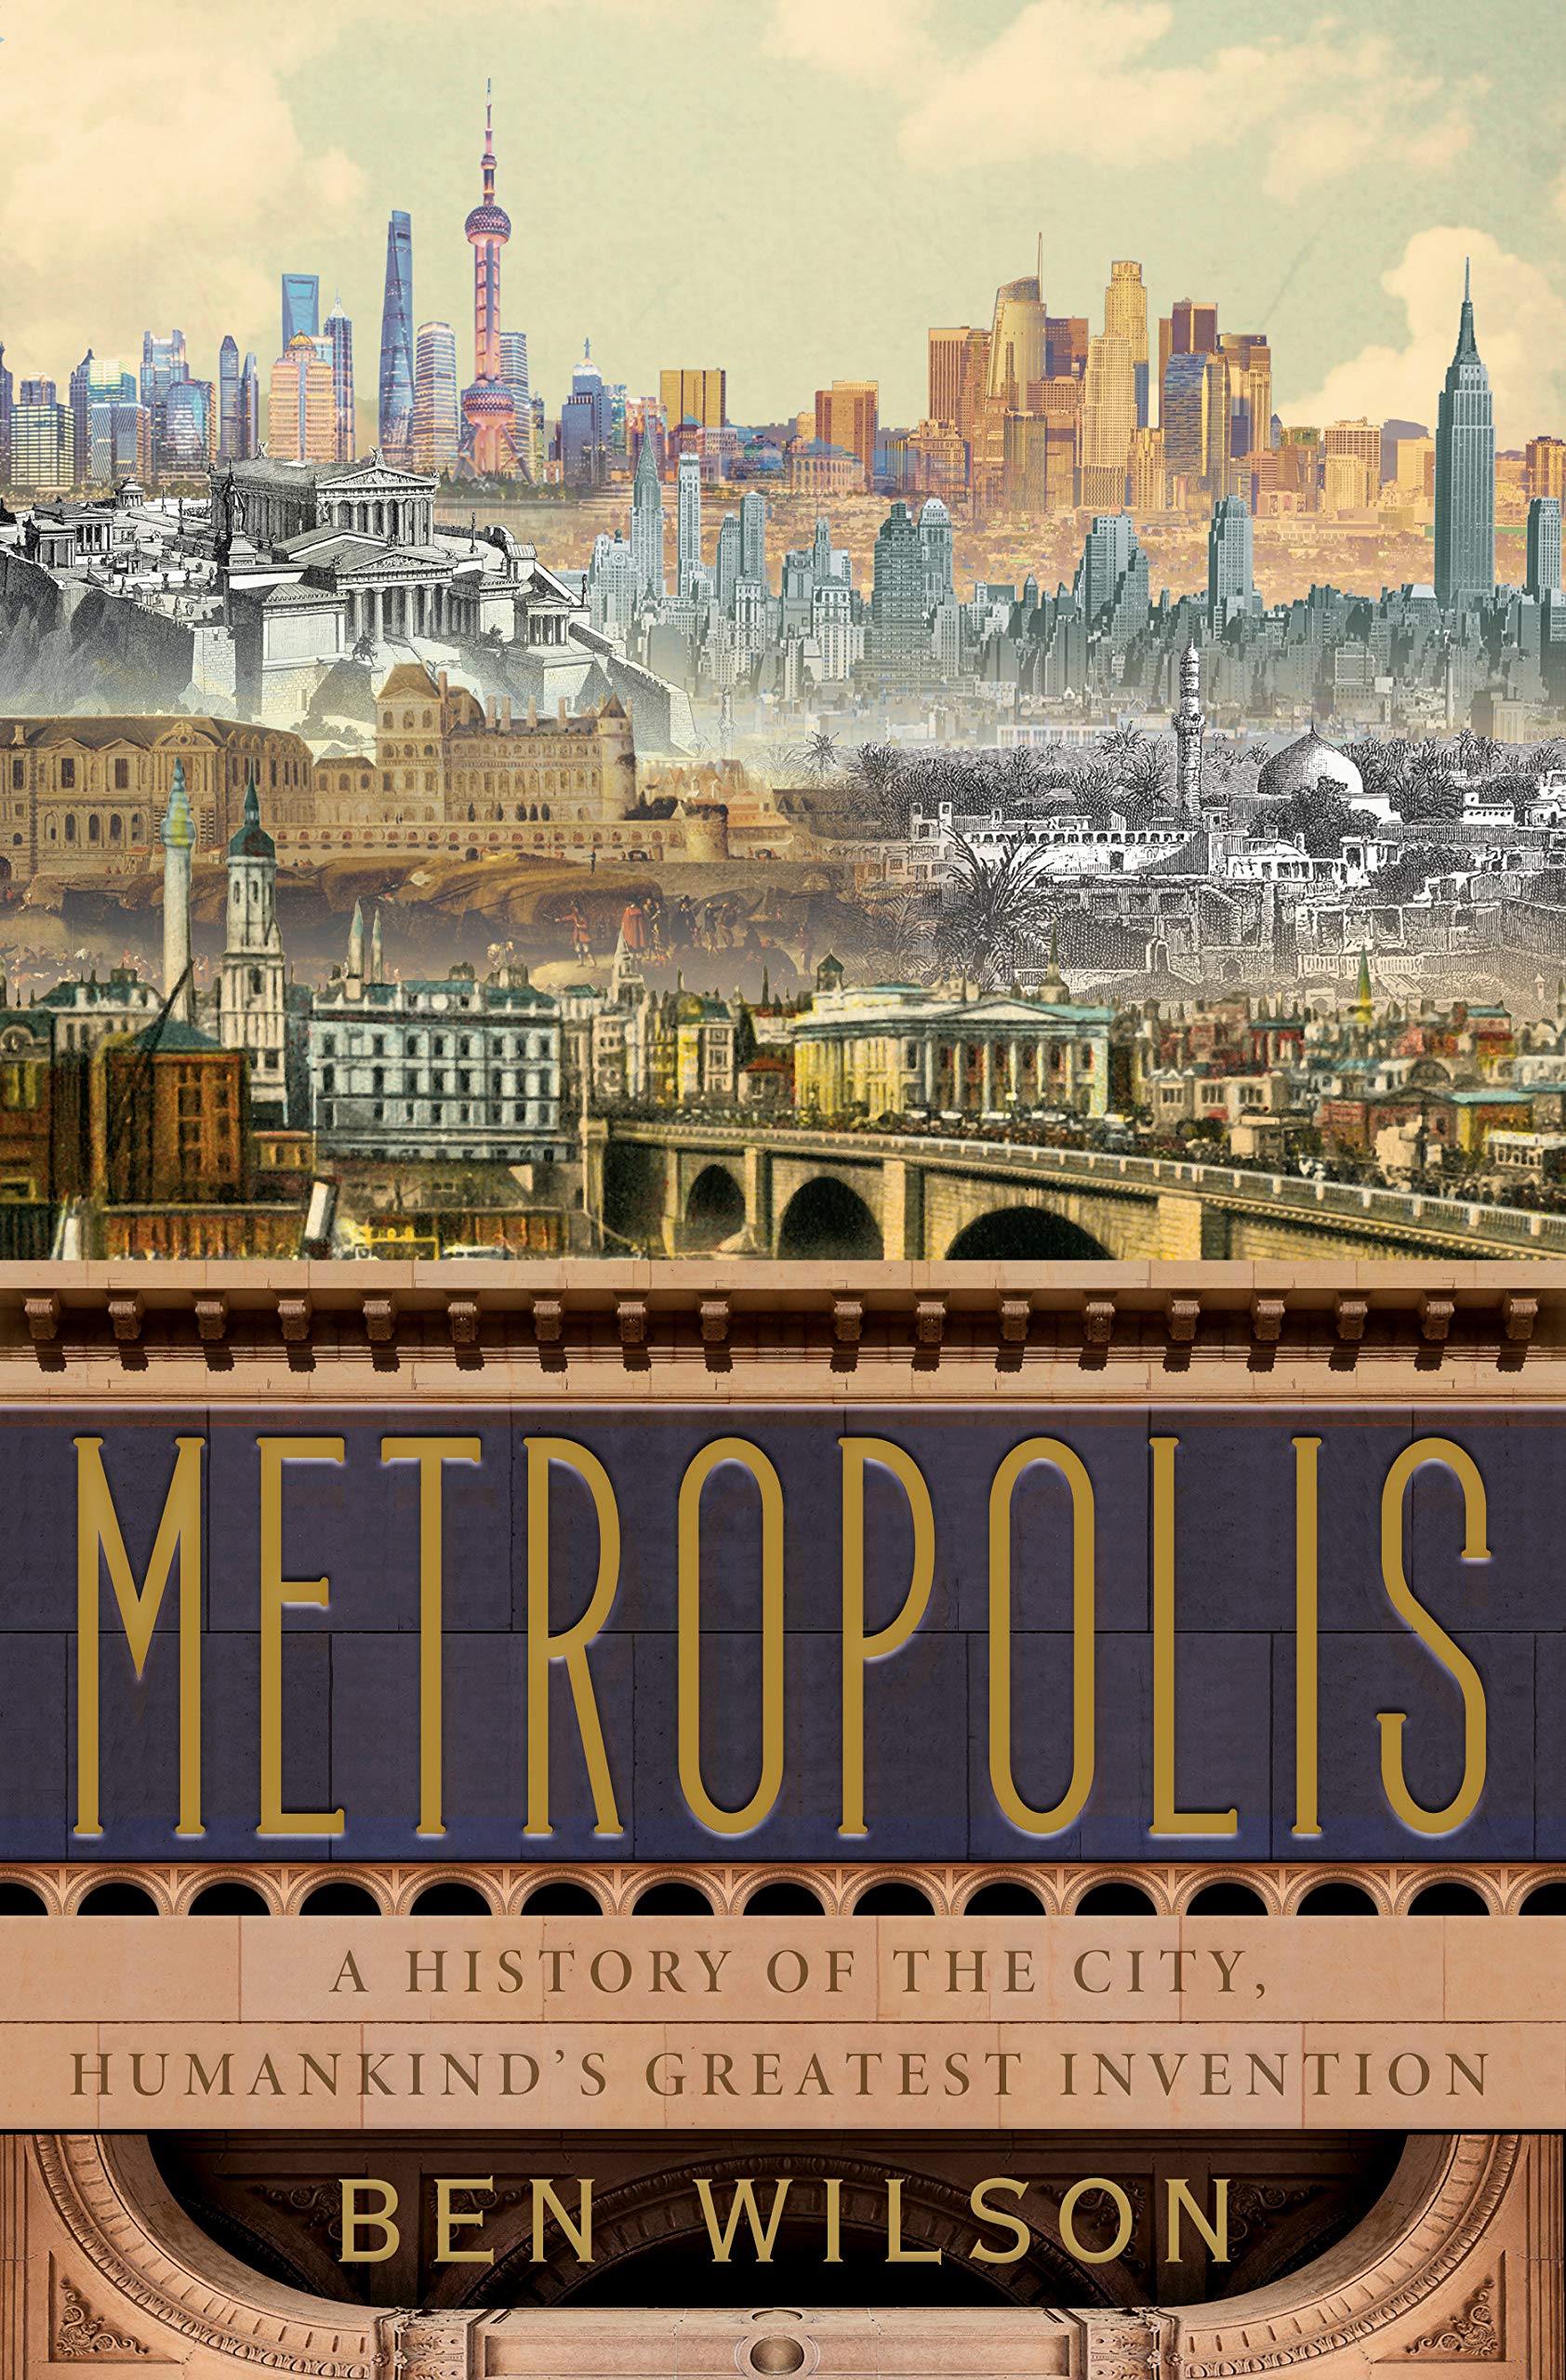 Metropolis-A history of the City, Humankind’s Greatest Invention